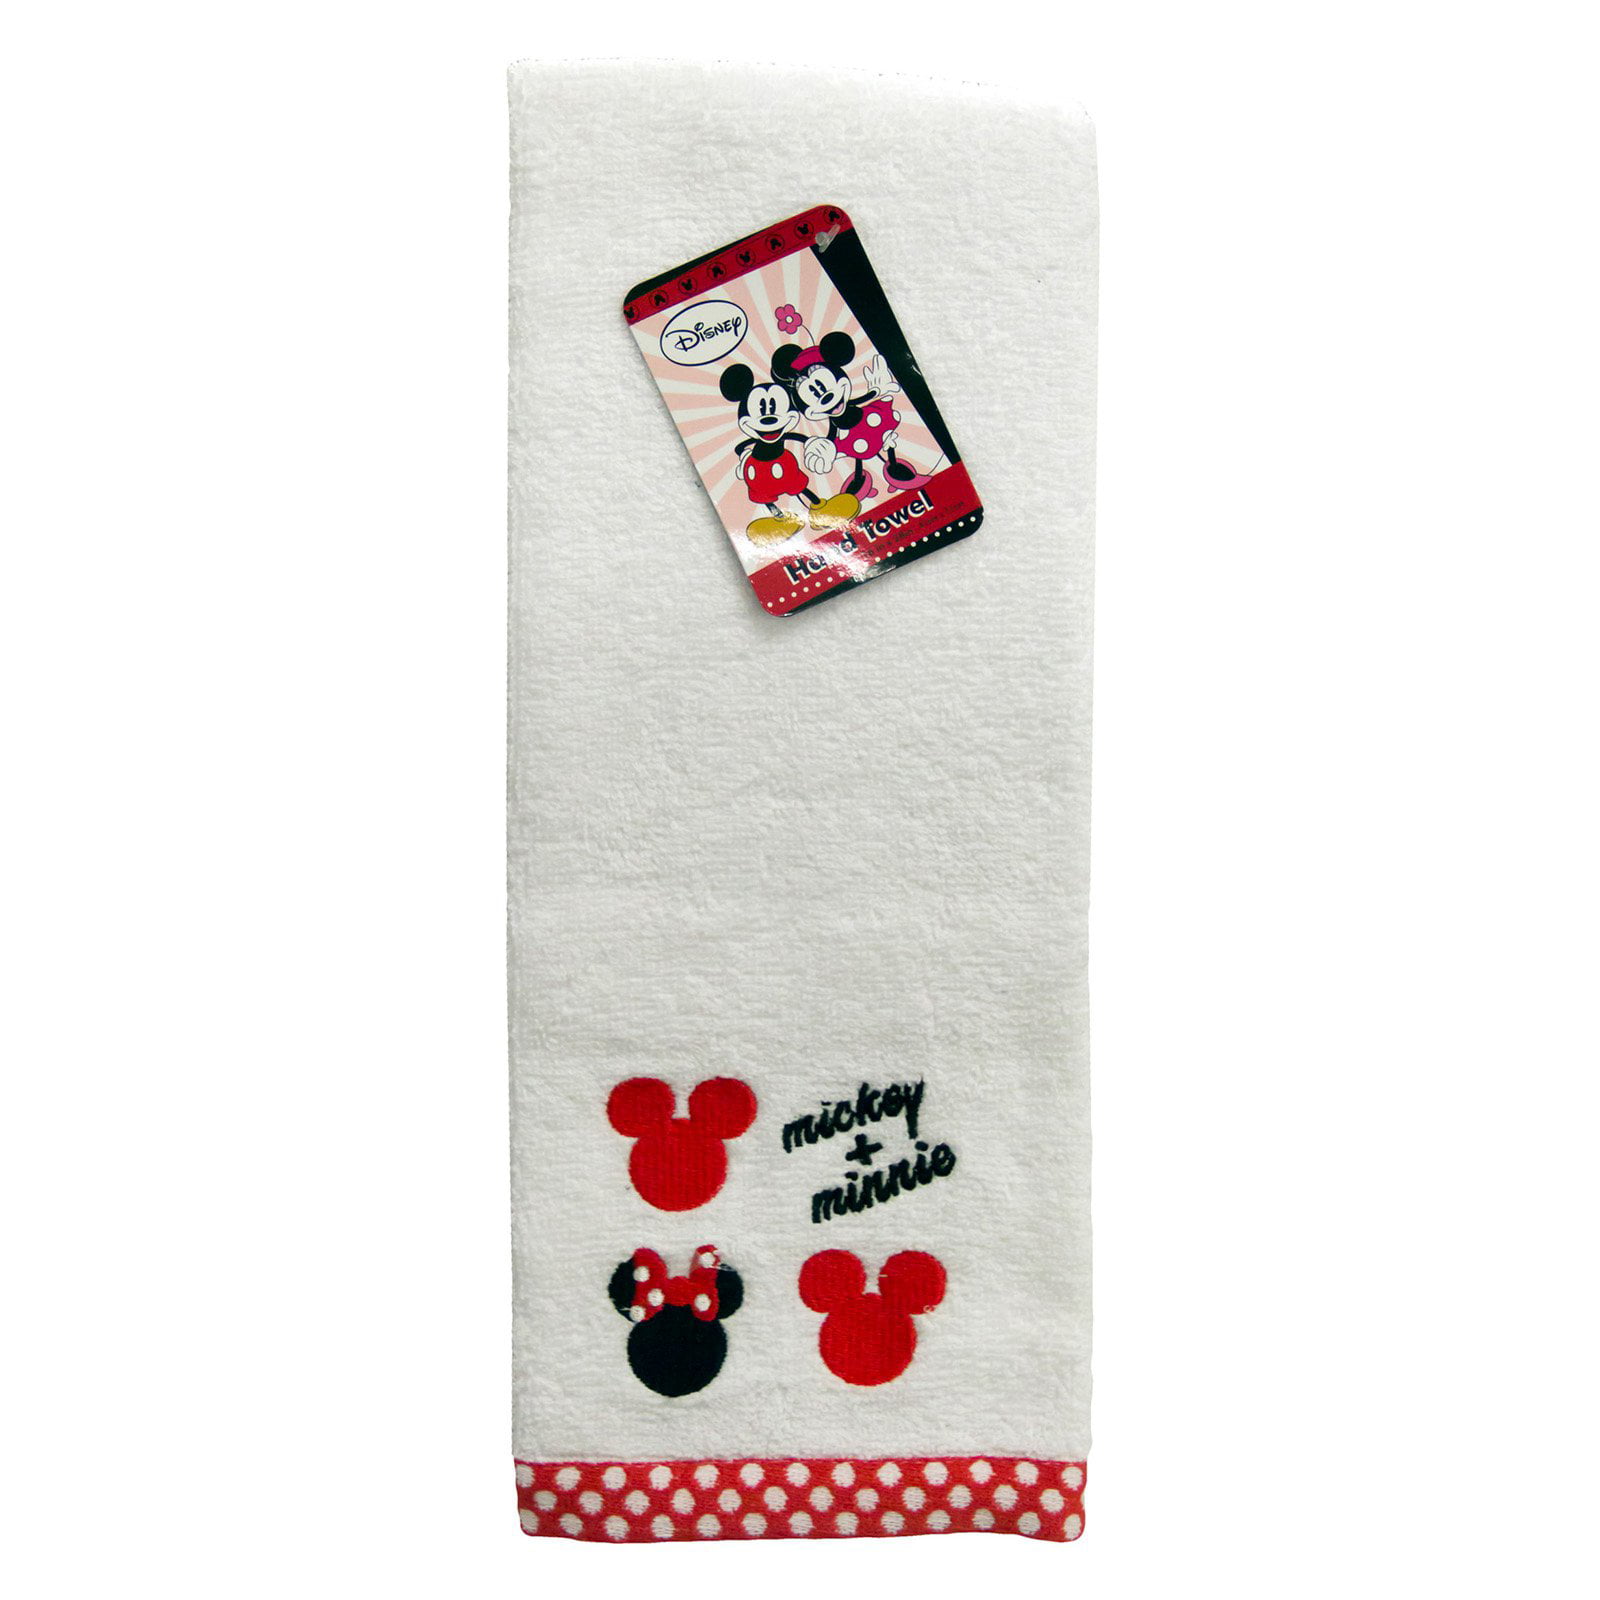 2 with Mickey Mouse  & 2 with Minnie Details about   4 Disney Hand Towels Or Kitchen Towels 